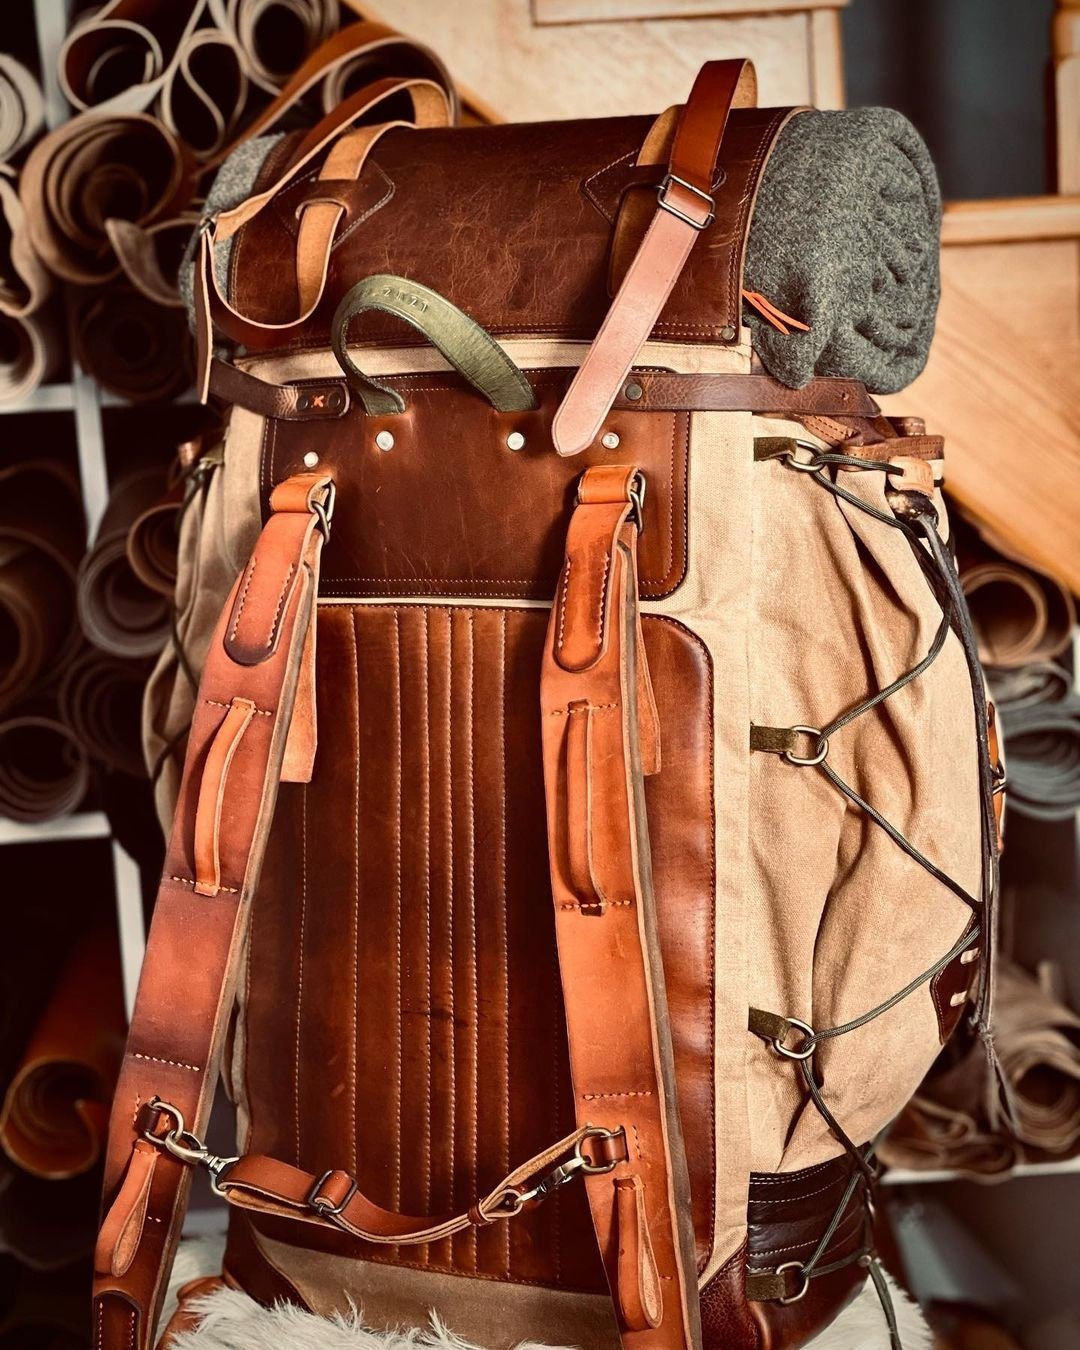 Custom Order Daniel | Bushcraft Design Finalist | Handmade Leather and Canvas Backpack for Travel, Camping,Military | 45 Liter | Personalization bushcraft - camping - hiking backpack 99percenthandmade   